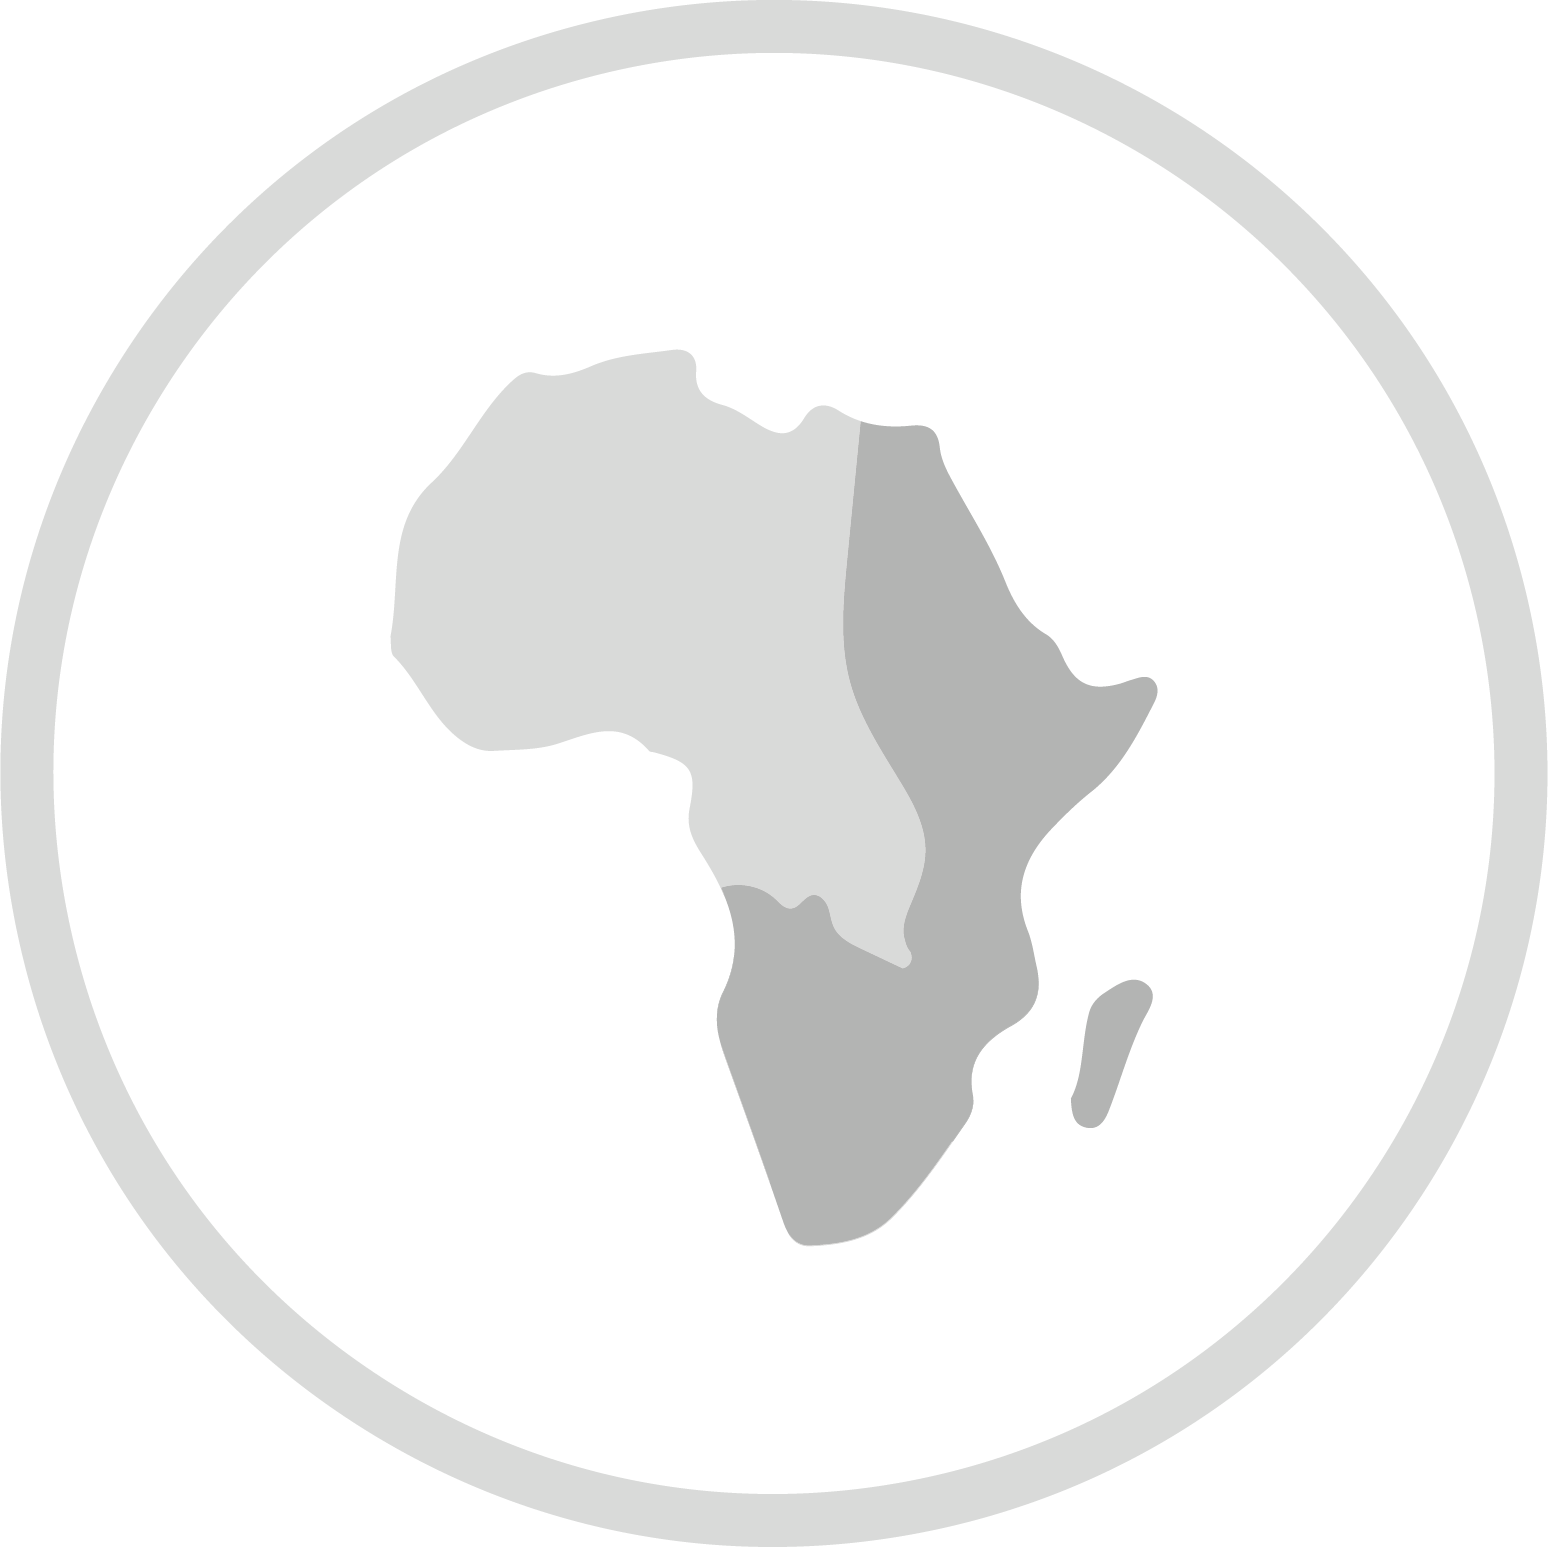 Eastern and Southern Africa